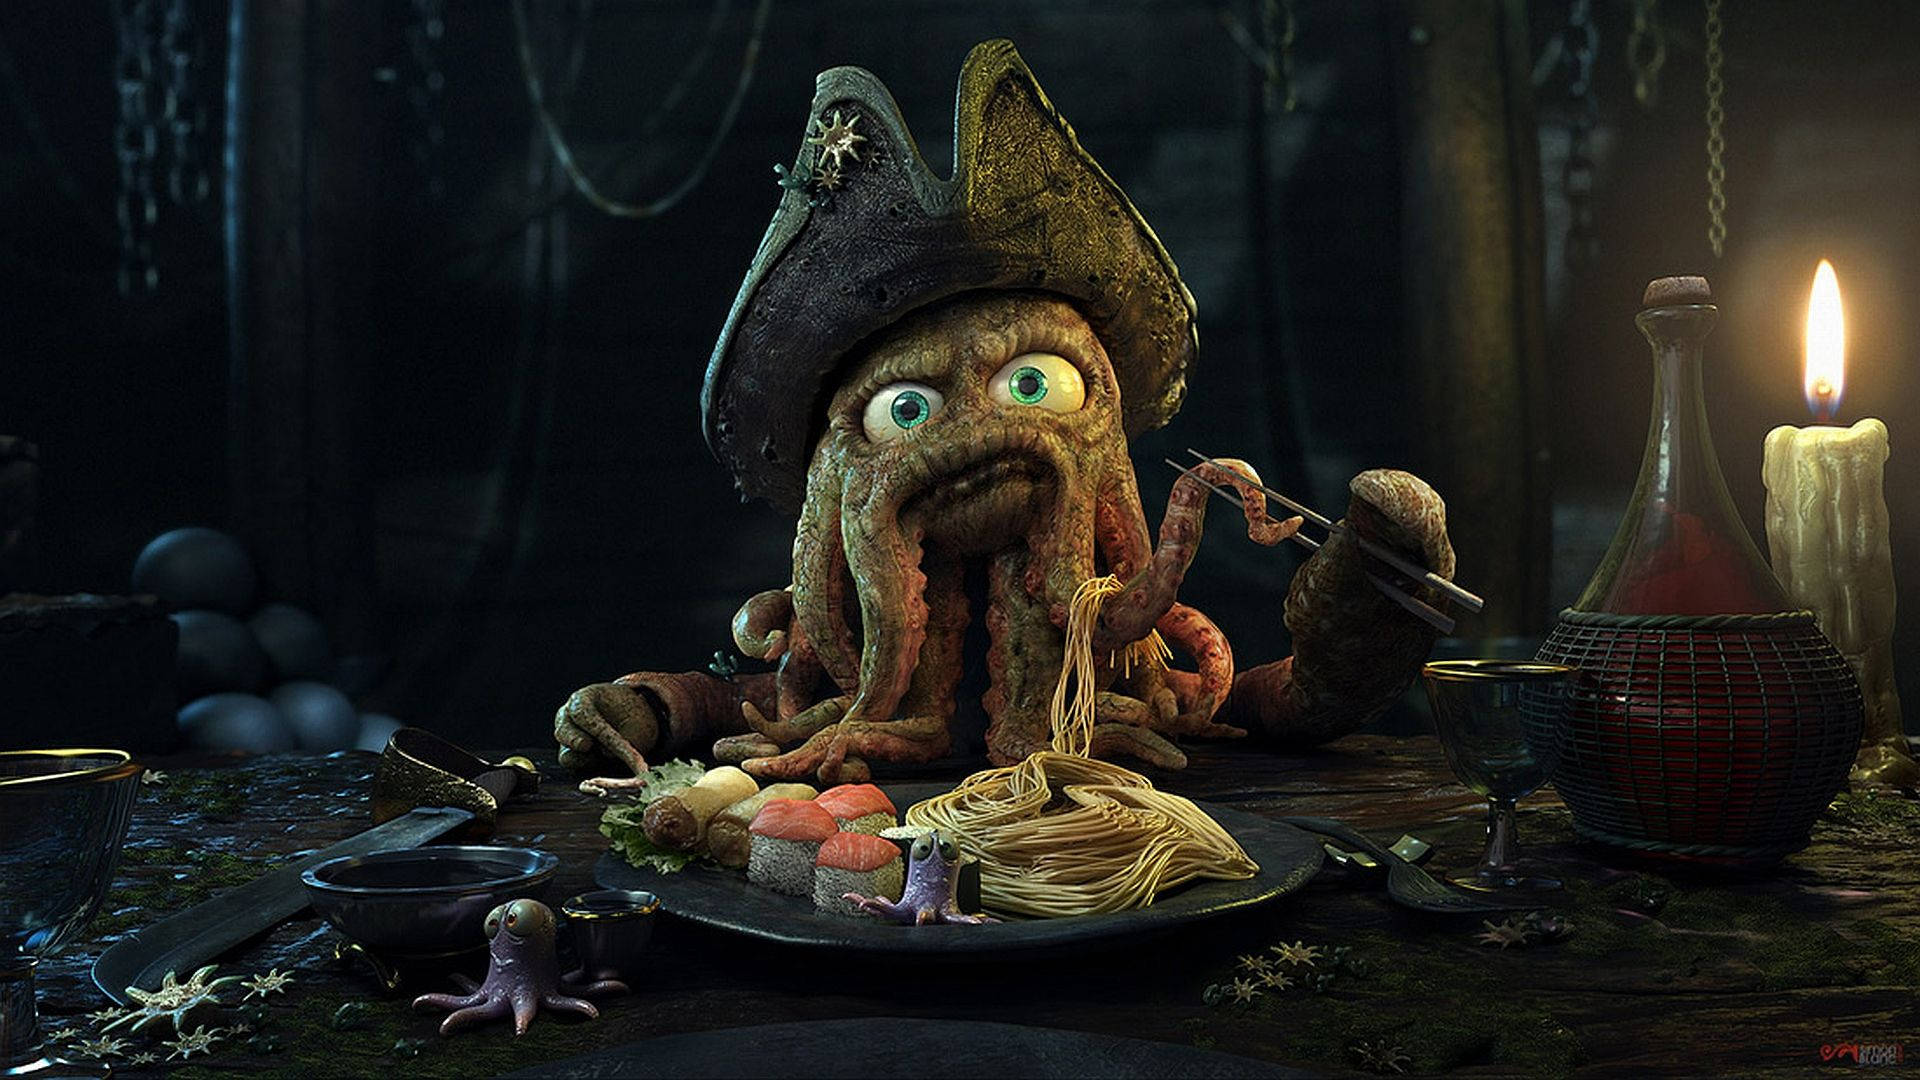 A Pirate Octopus Taking A Break From Sailing The Seven Seas And Digging Into A Delicious Dinner. Background